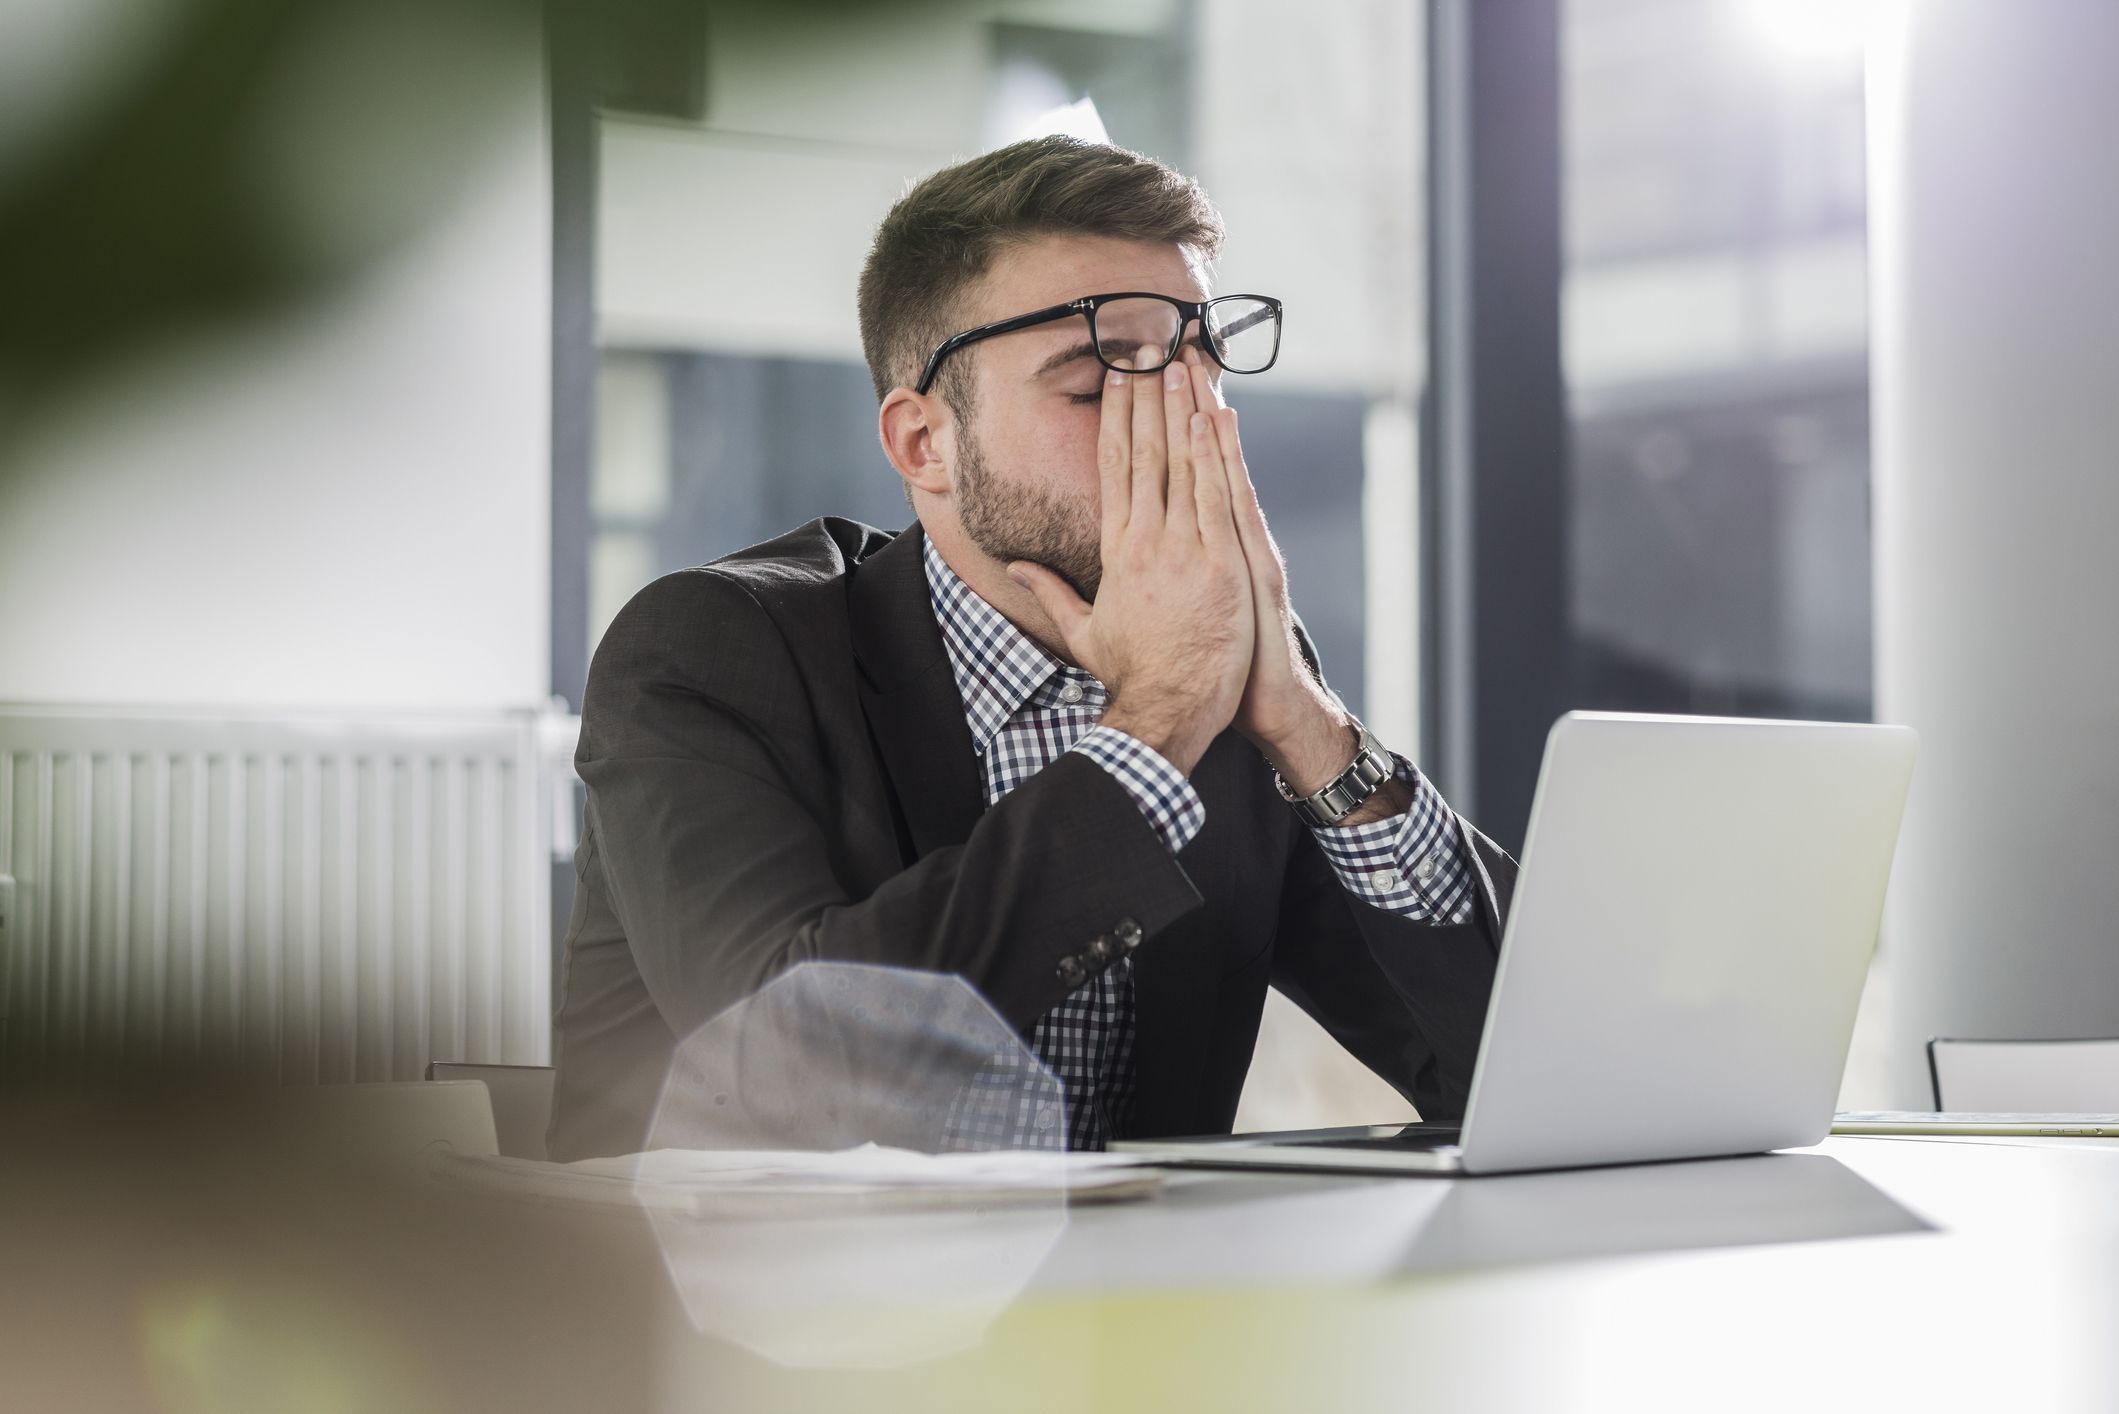 WHO recognizes workplace 'burnout' as an occupational phenomenon